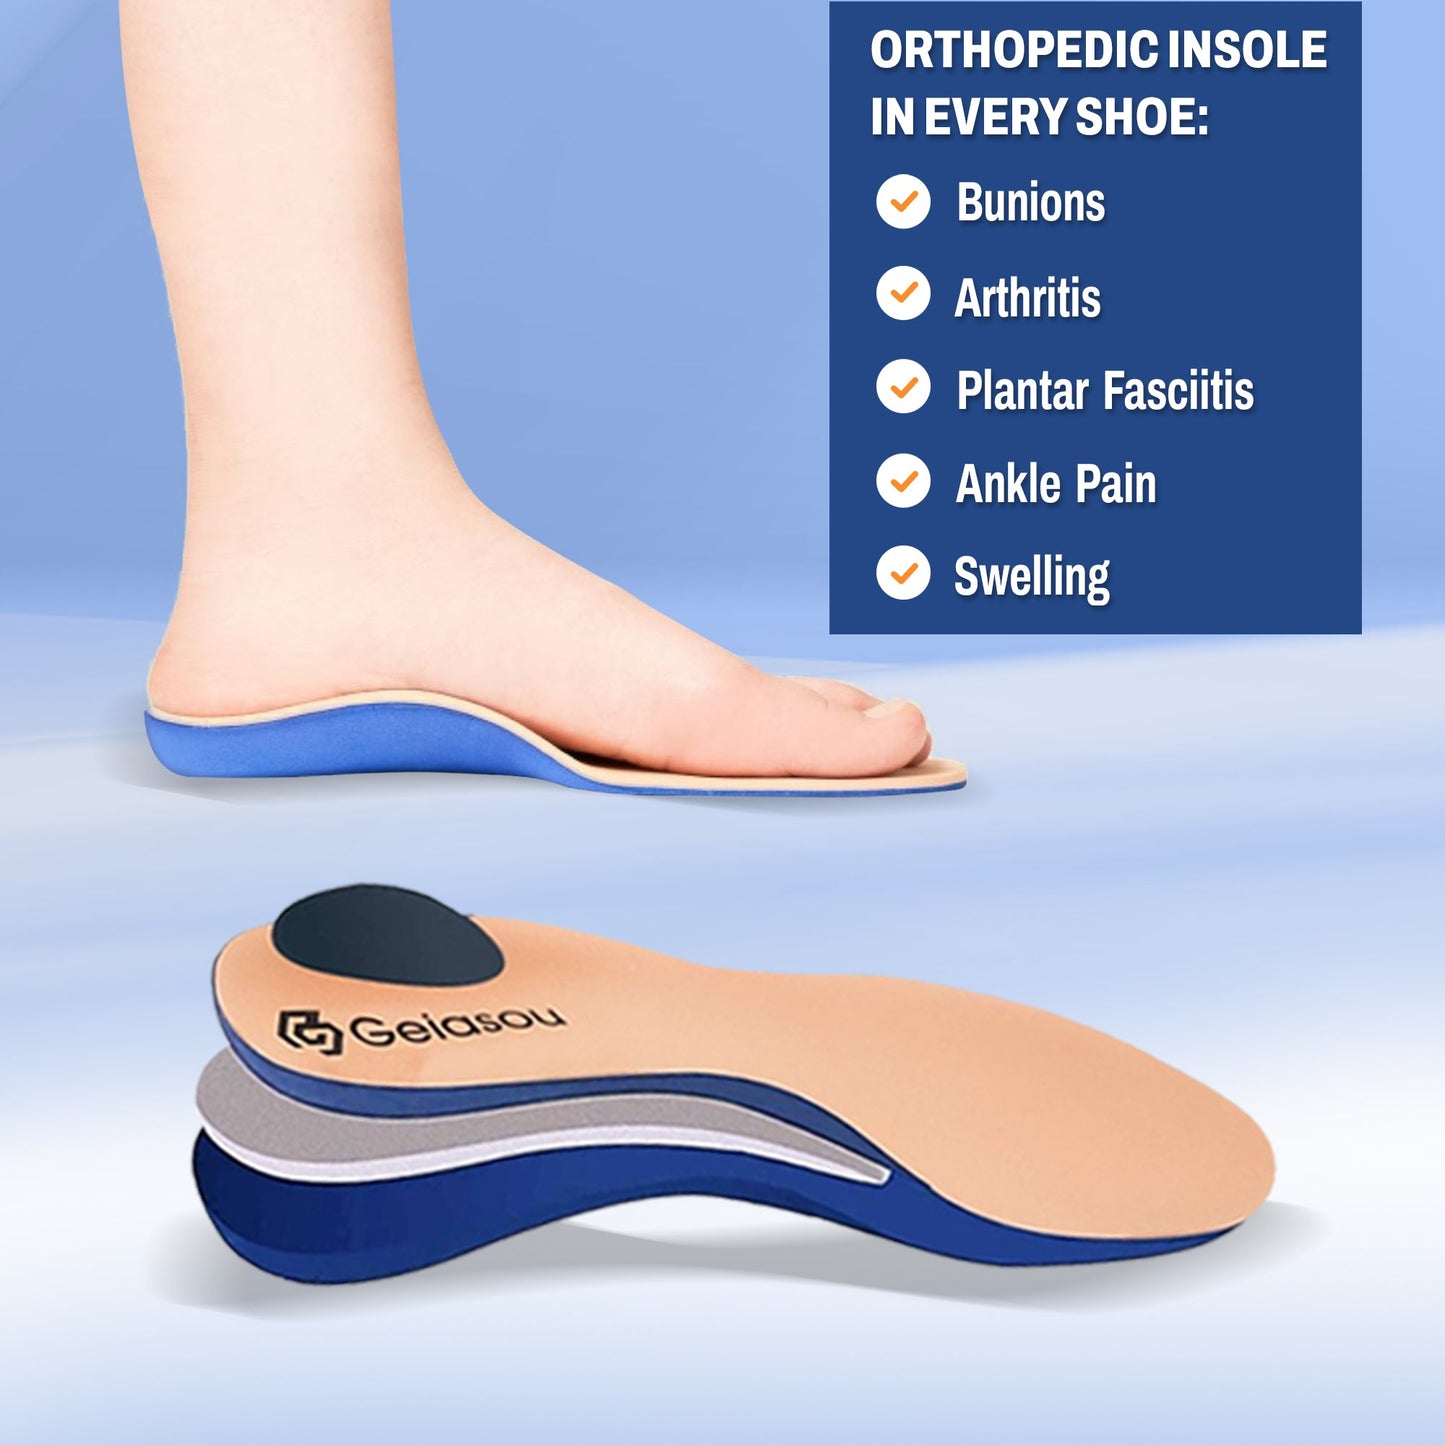 GRW OrthoPro Ergonomic Pain-relief Women Shoes | Breathable Orthopedic Shoes